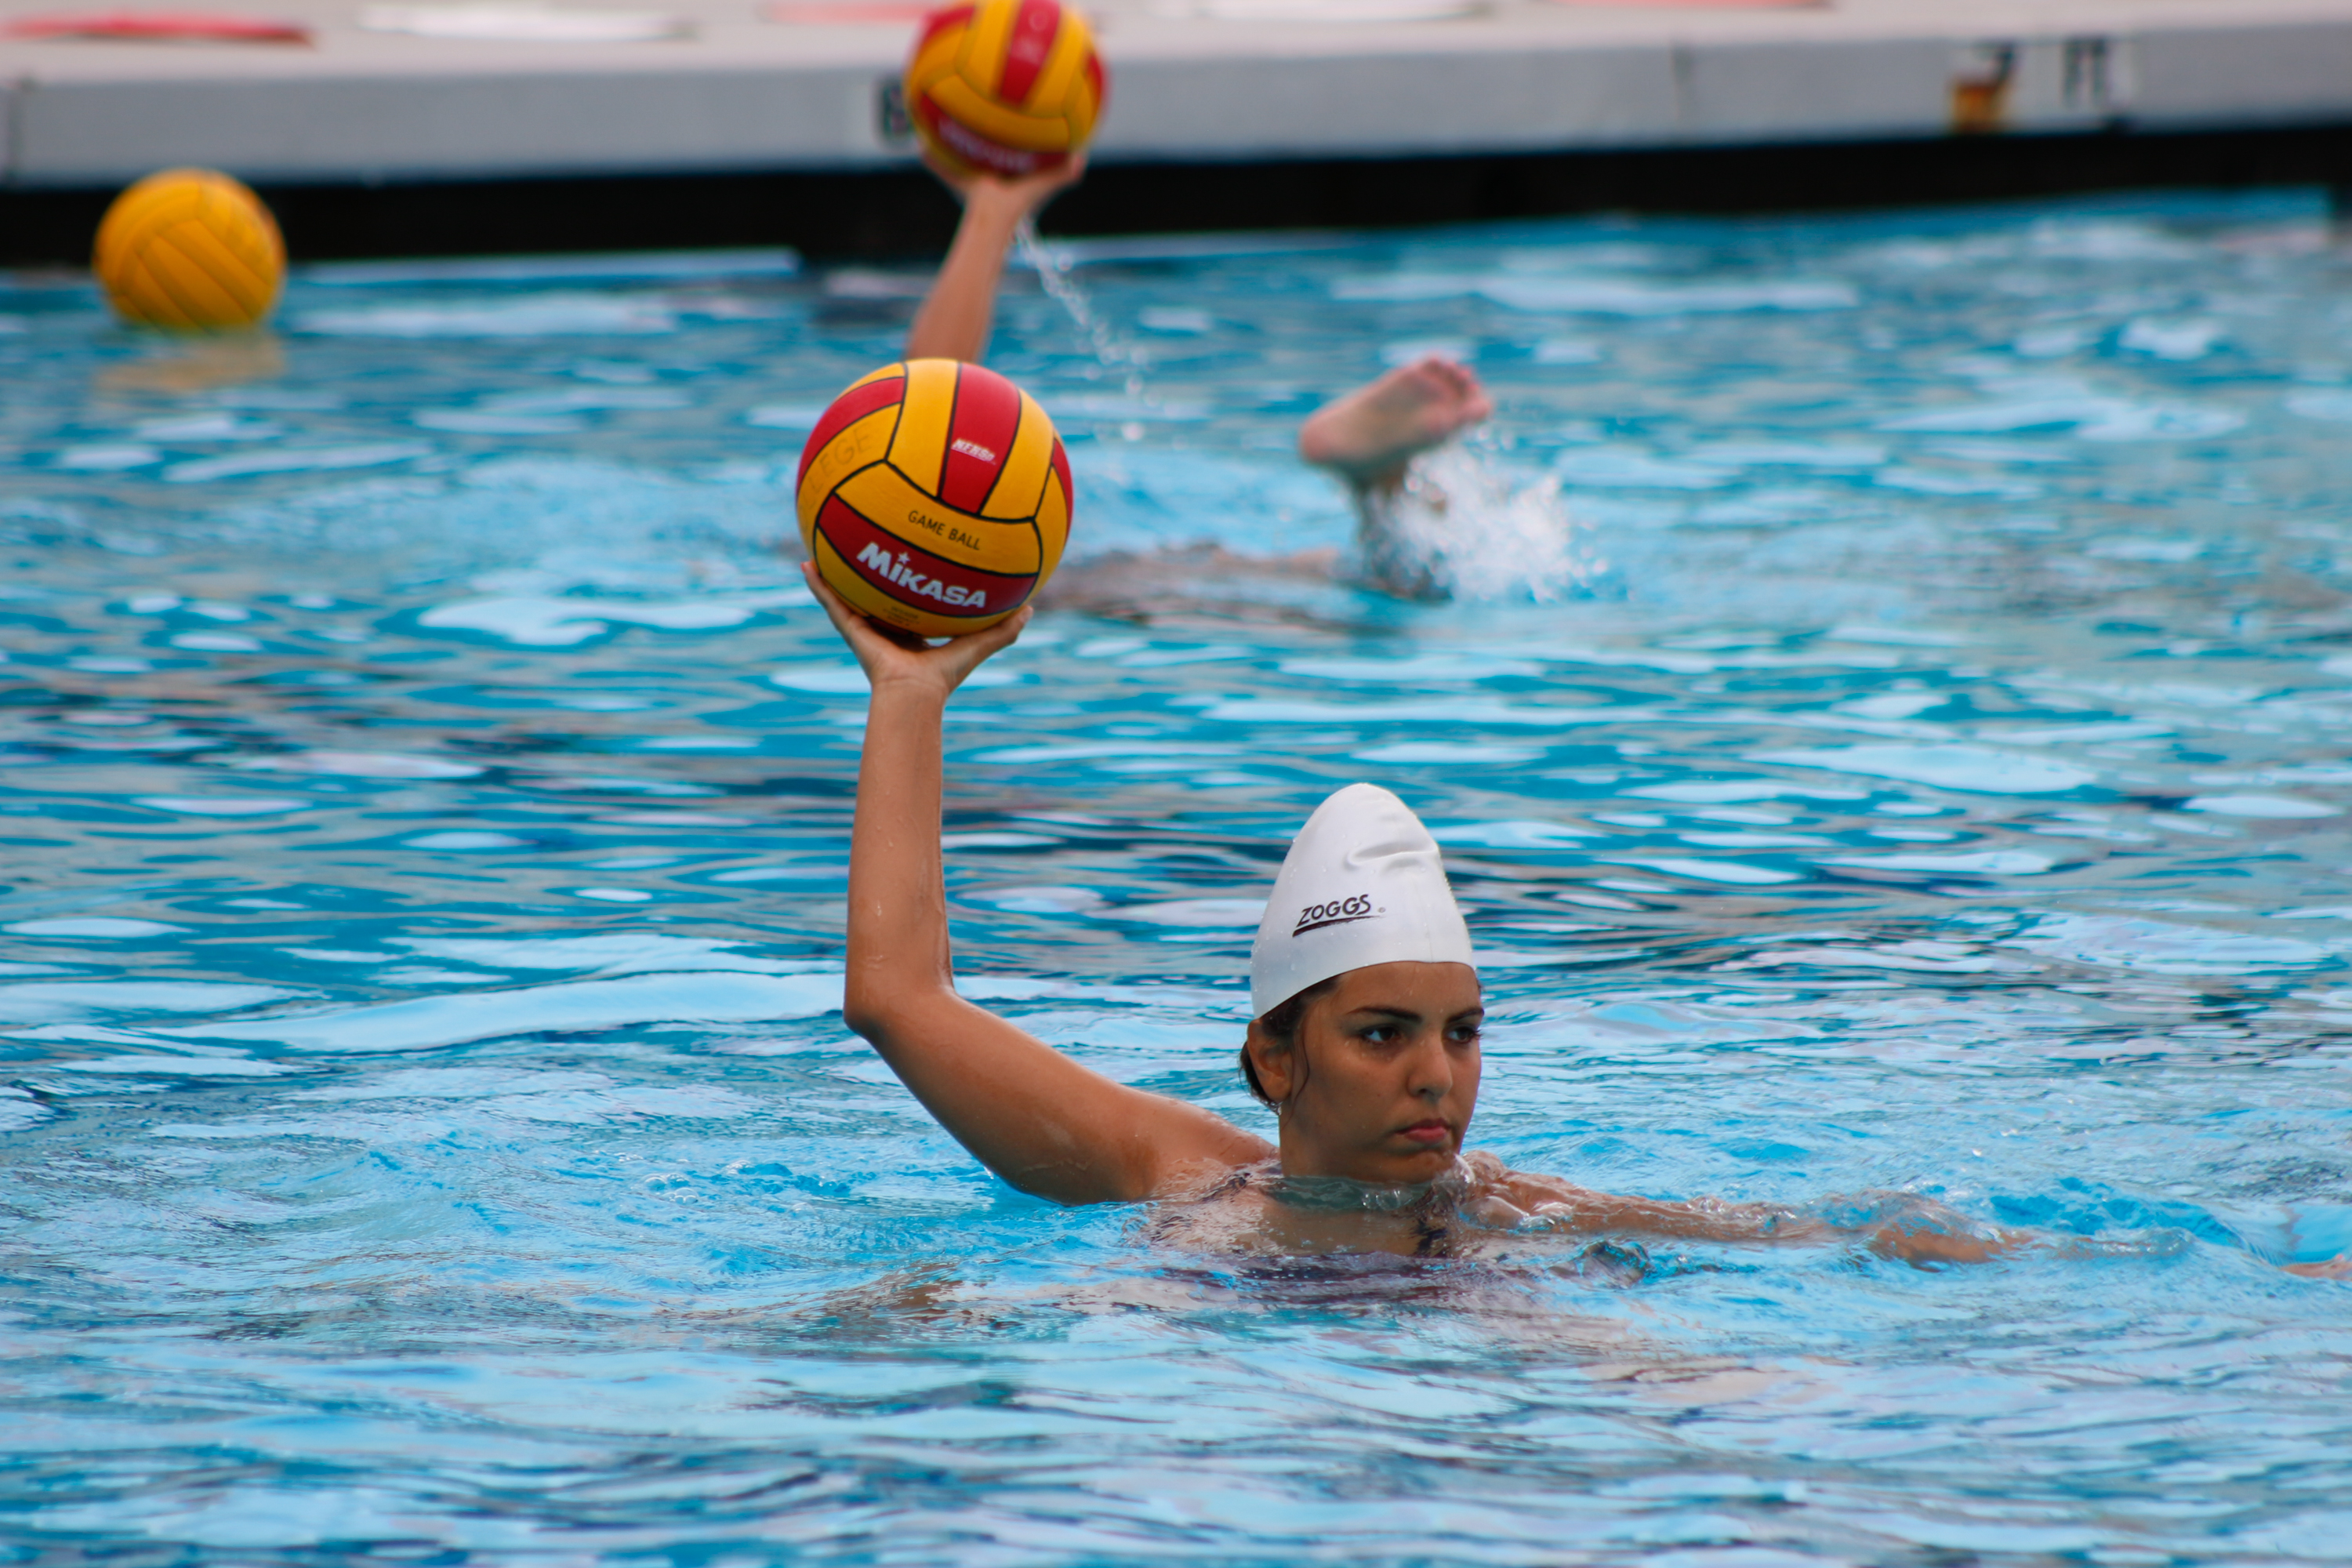 SEASON PREVIEW: Water polo ready to hit the pool